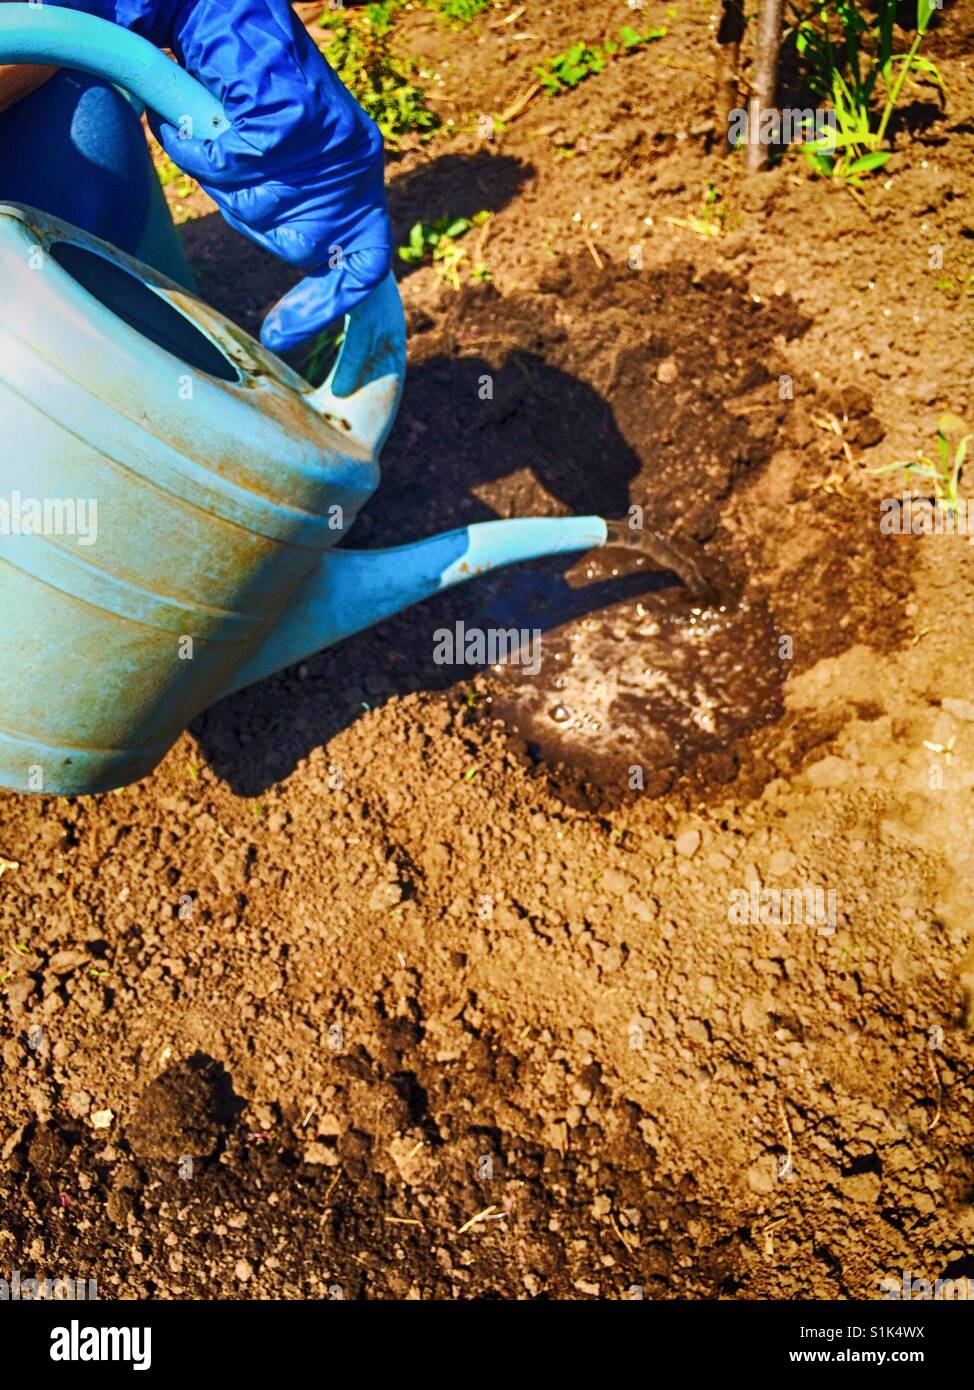 Person hand in garden glove with watering can water hole in soil Stock Photo